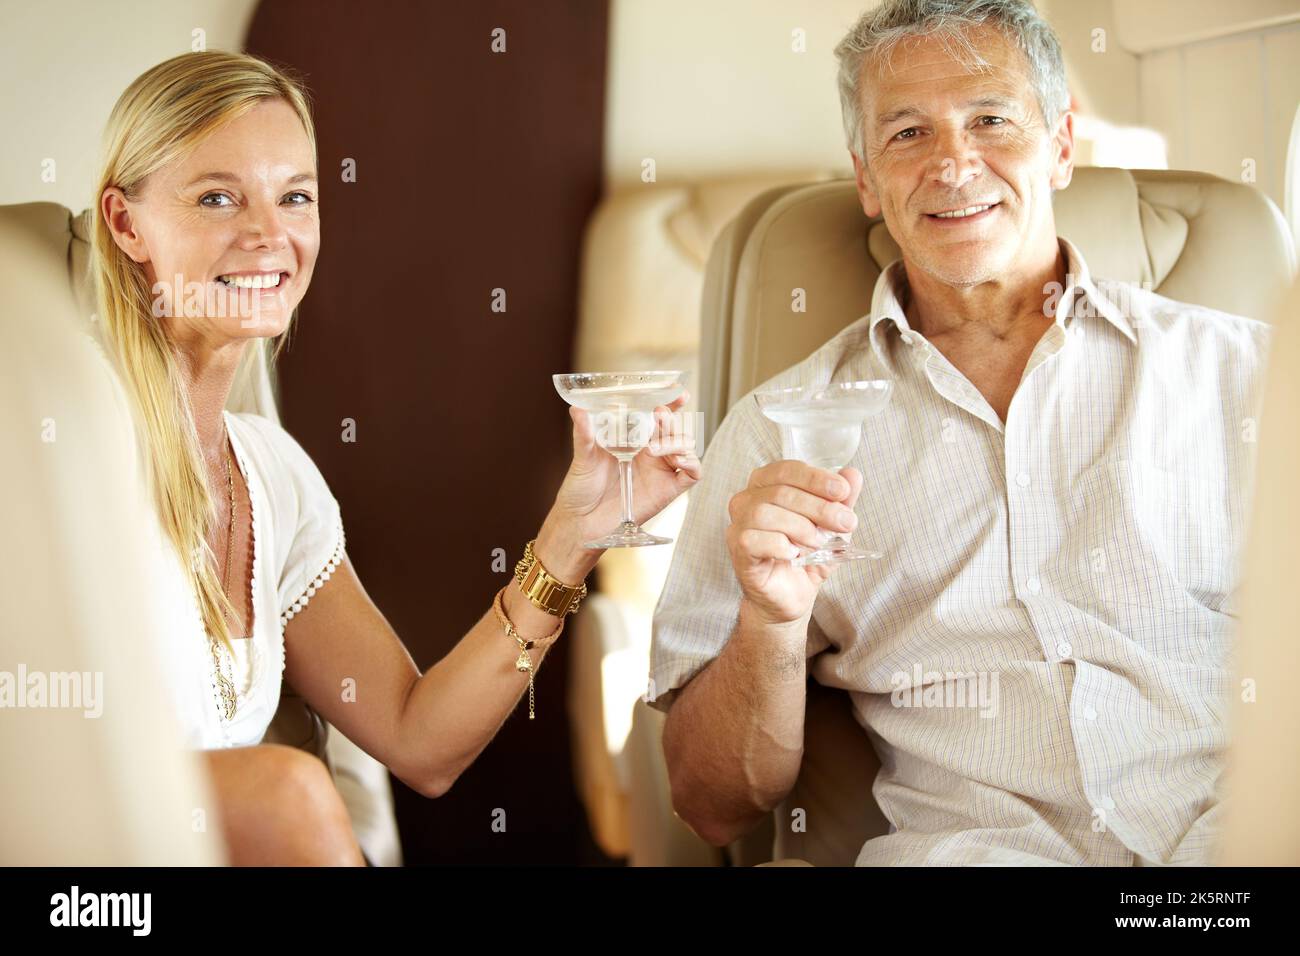 Cheers. Smiling couple seated in a private jet and toasting each other - portrait. Stock Photo